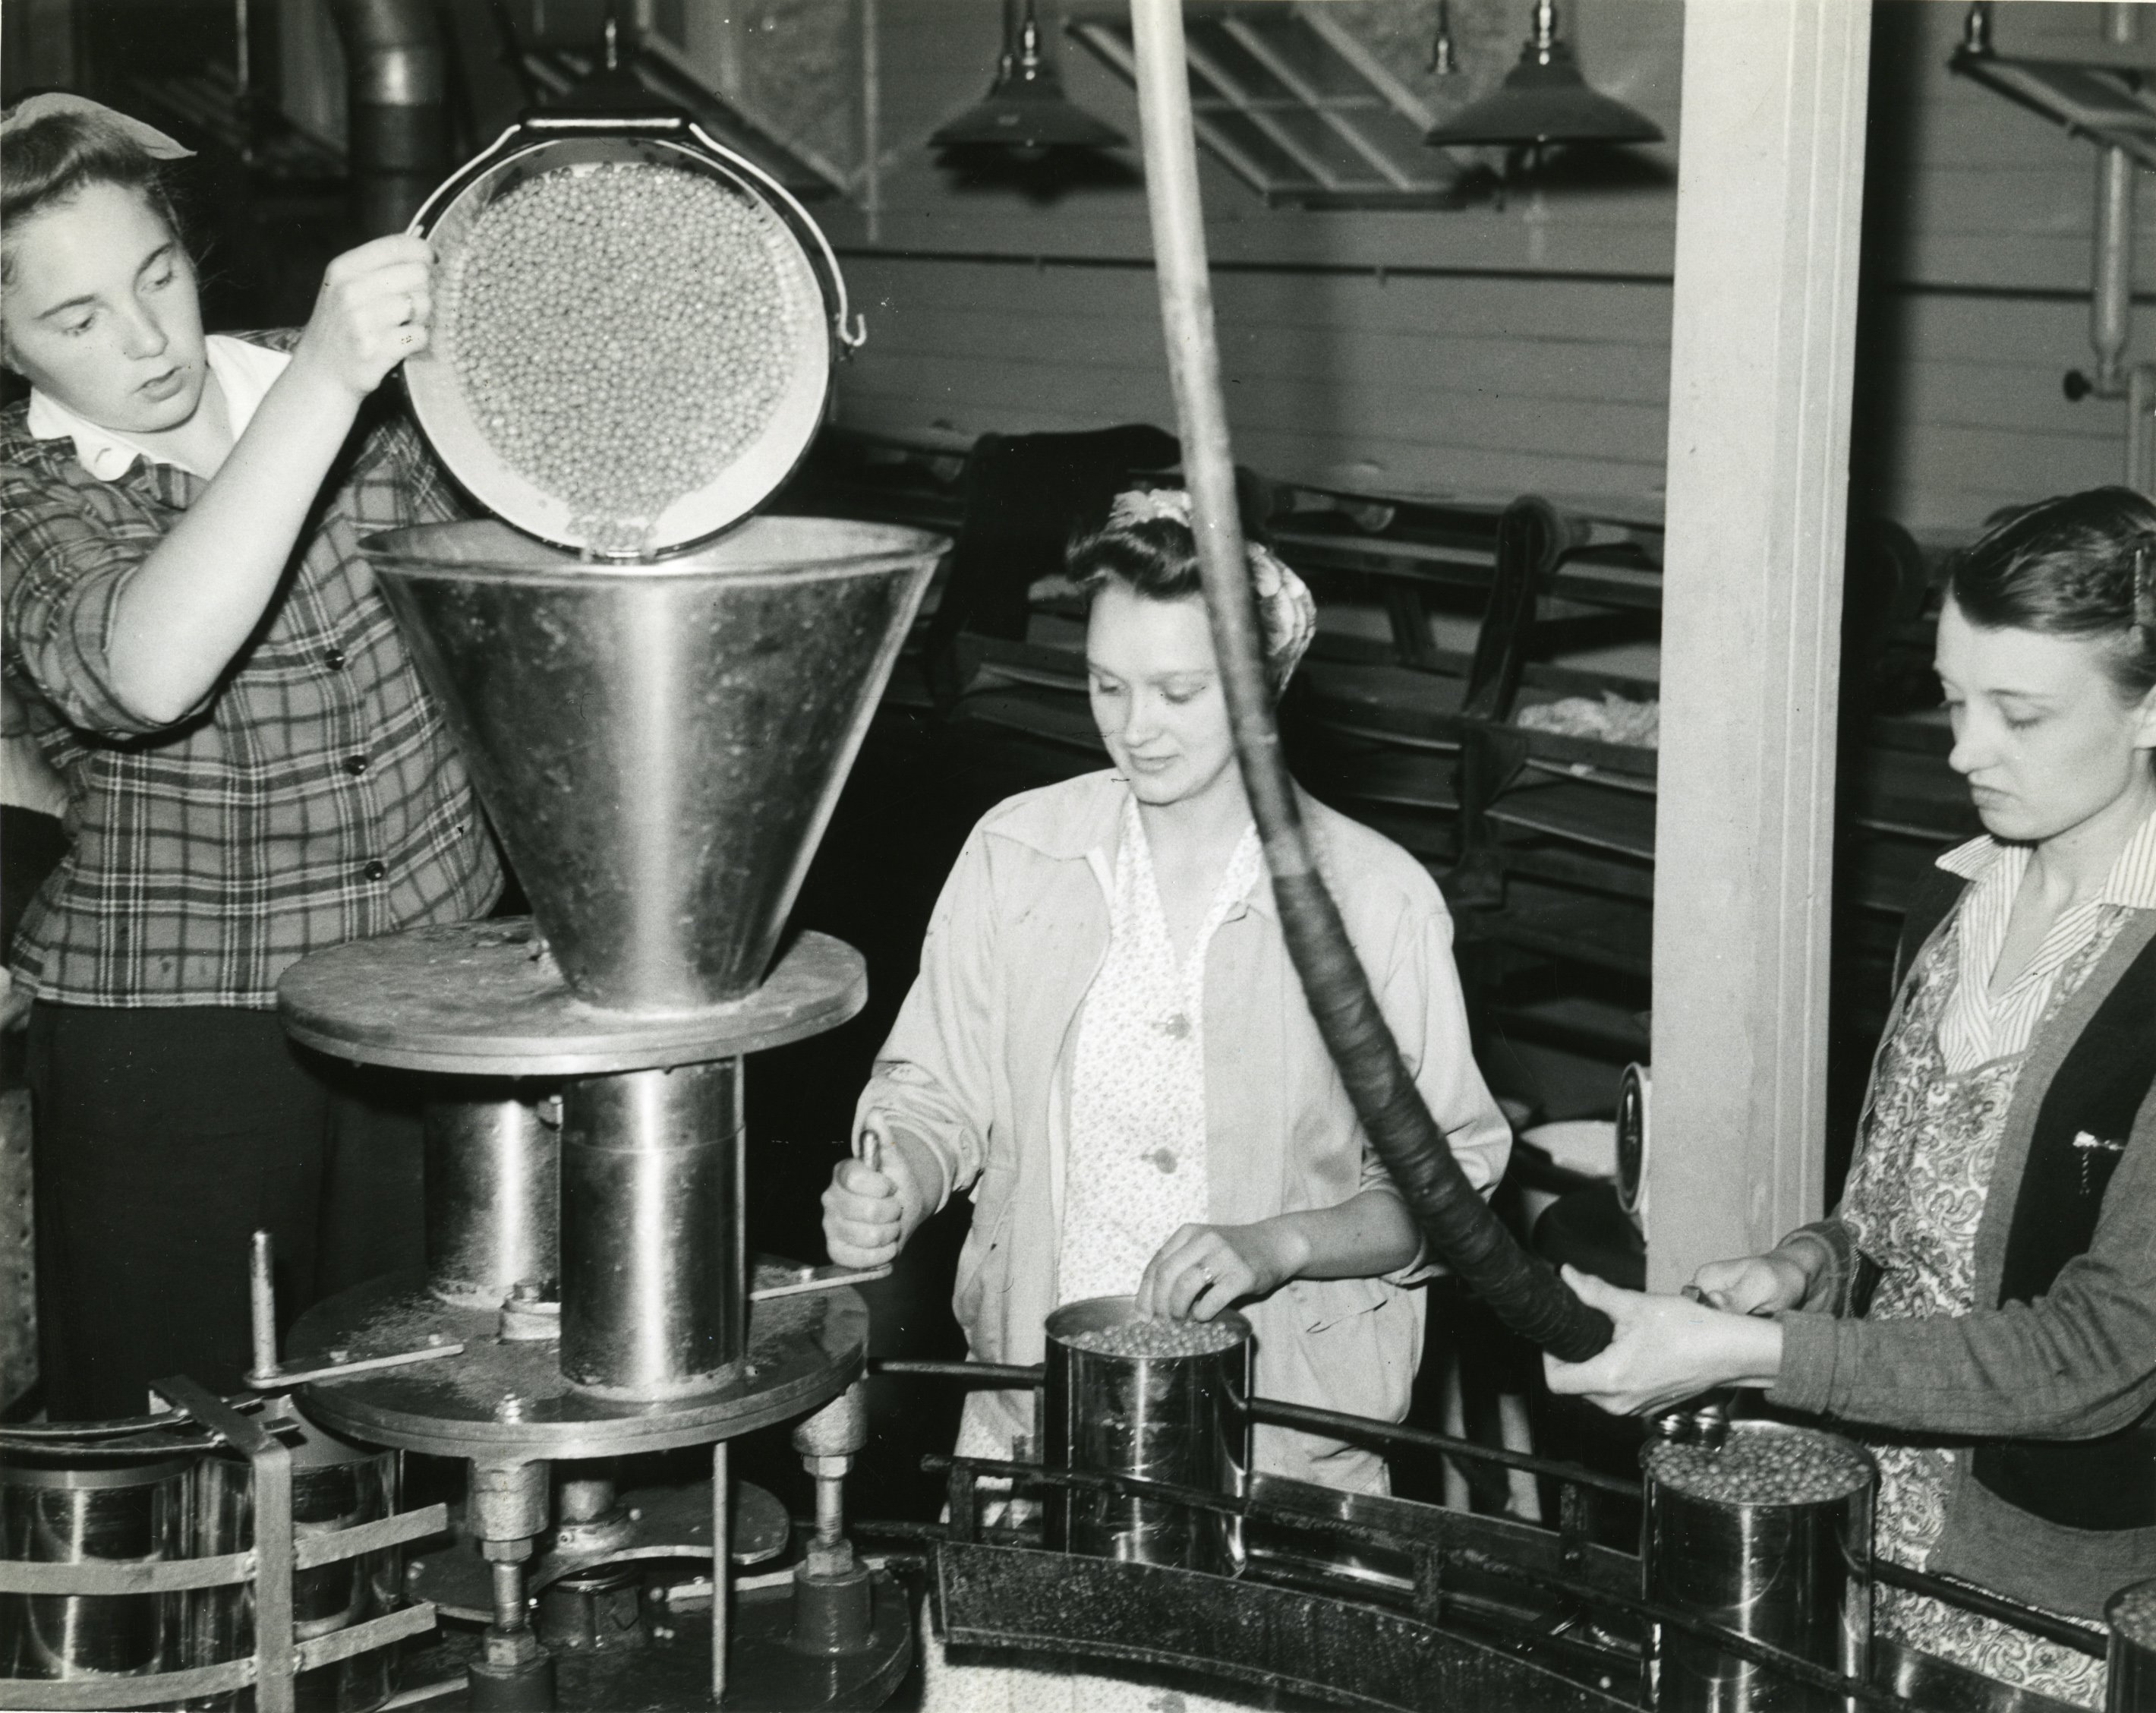 Canning at the cannery during World War II.